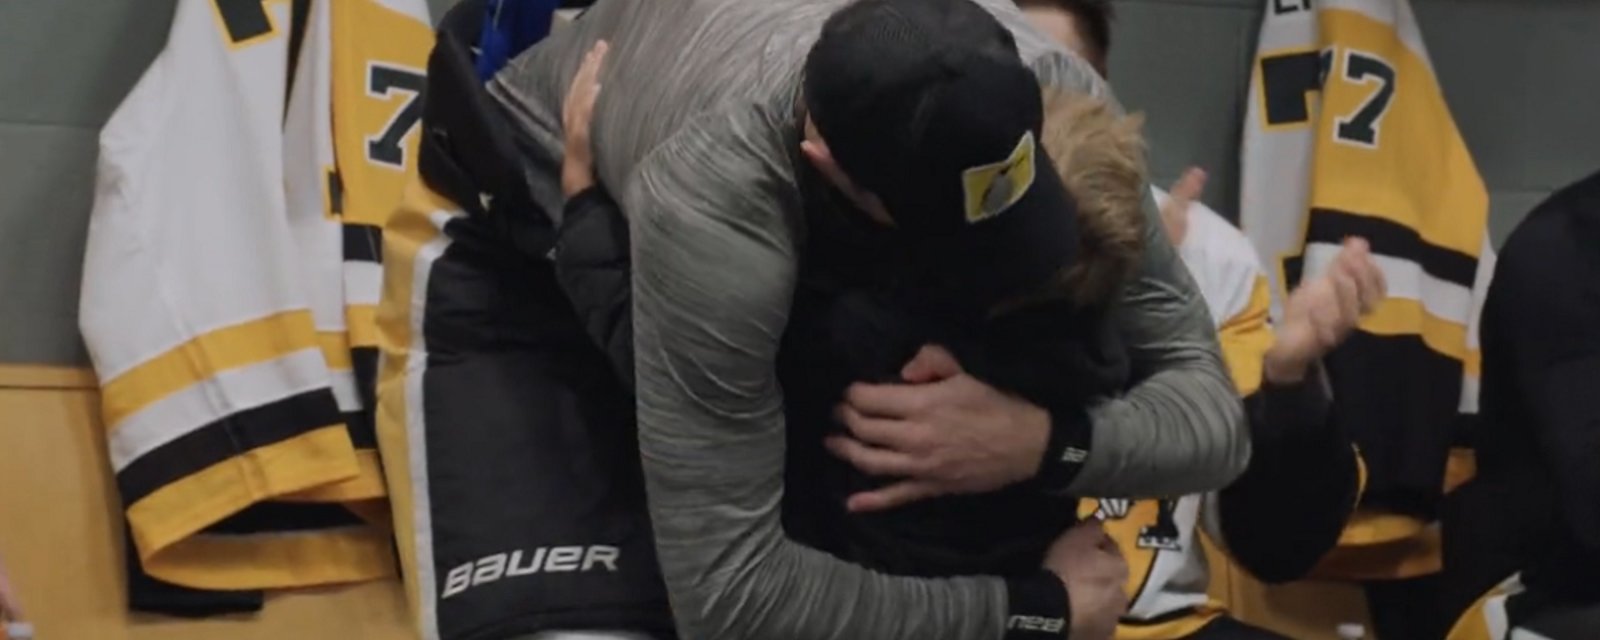 Evgeni Malkin gets a special surprise before his 1000th NHL game.